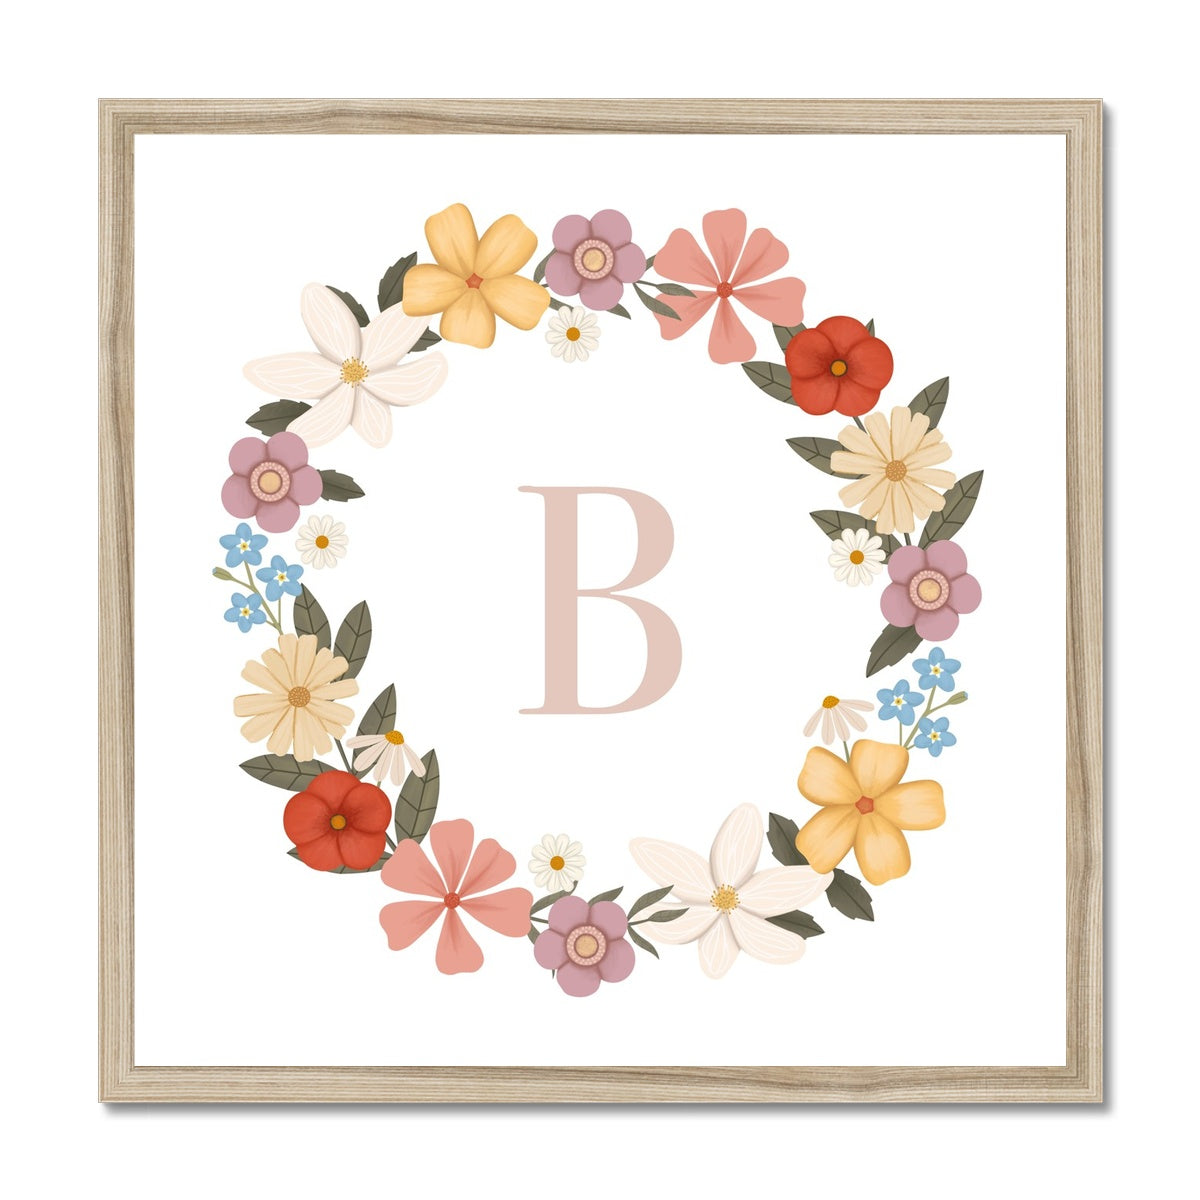 Personalised Floral Wreath in white / Framed Print